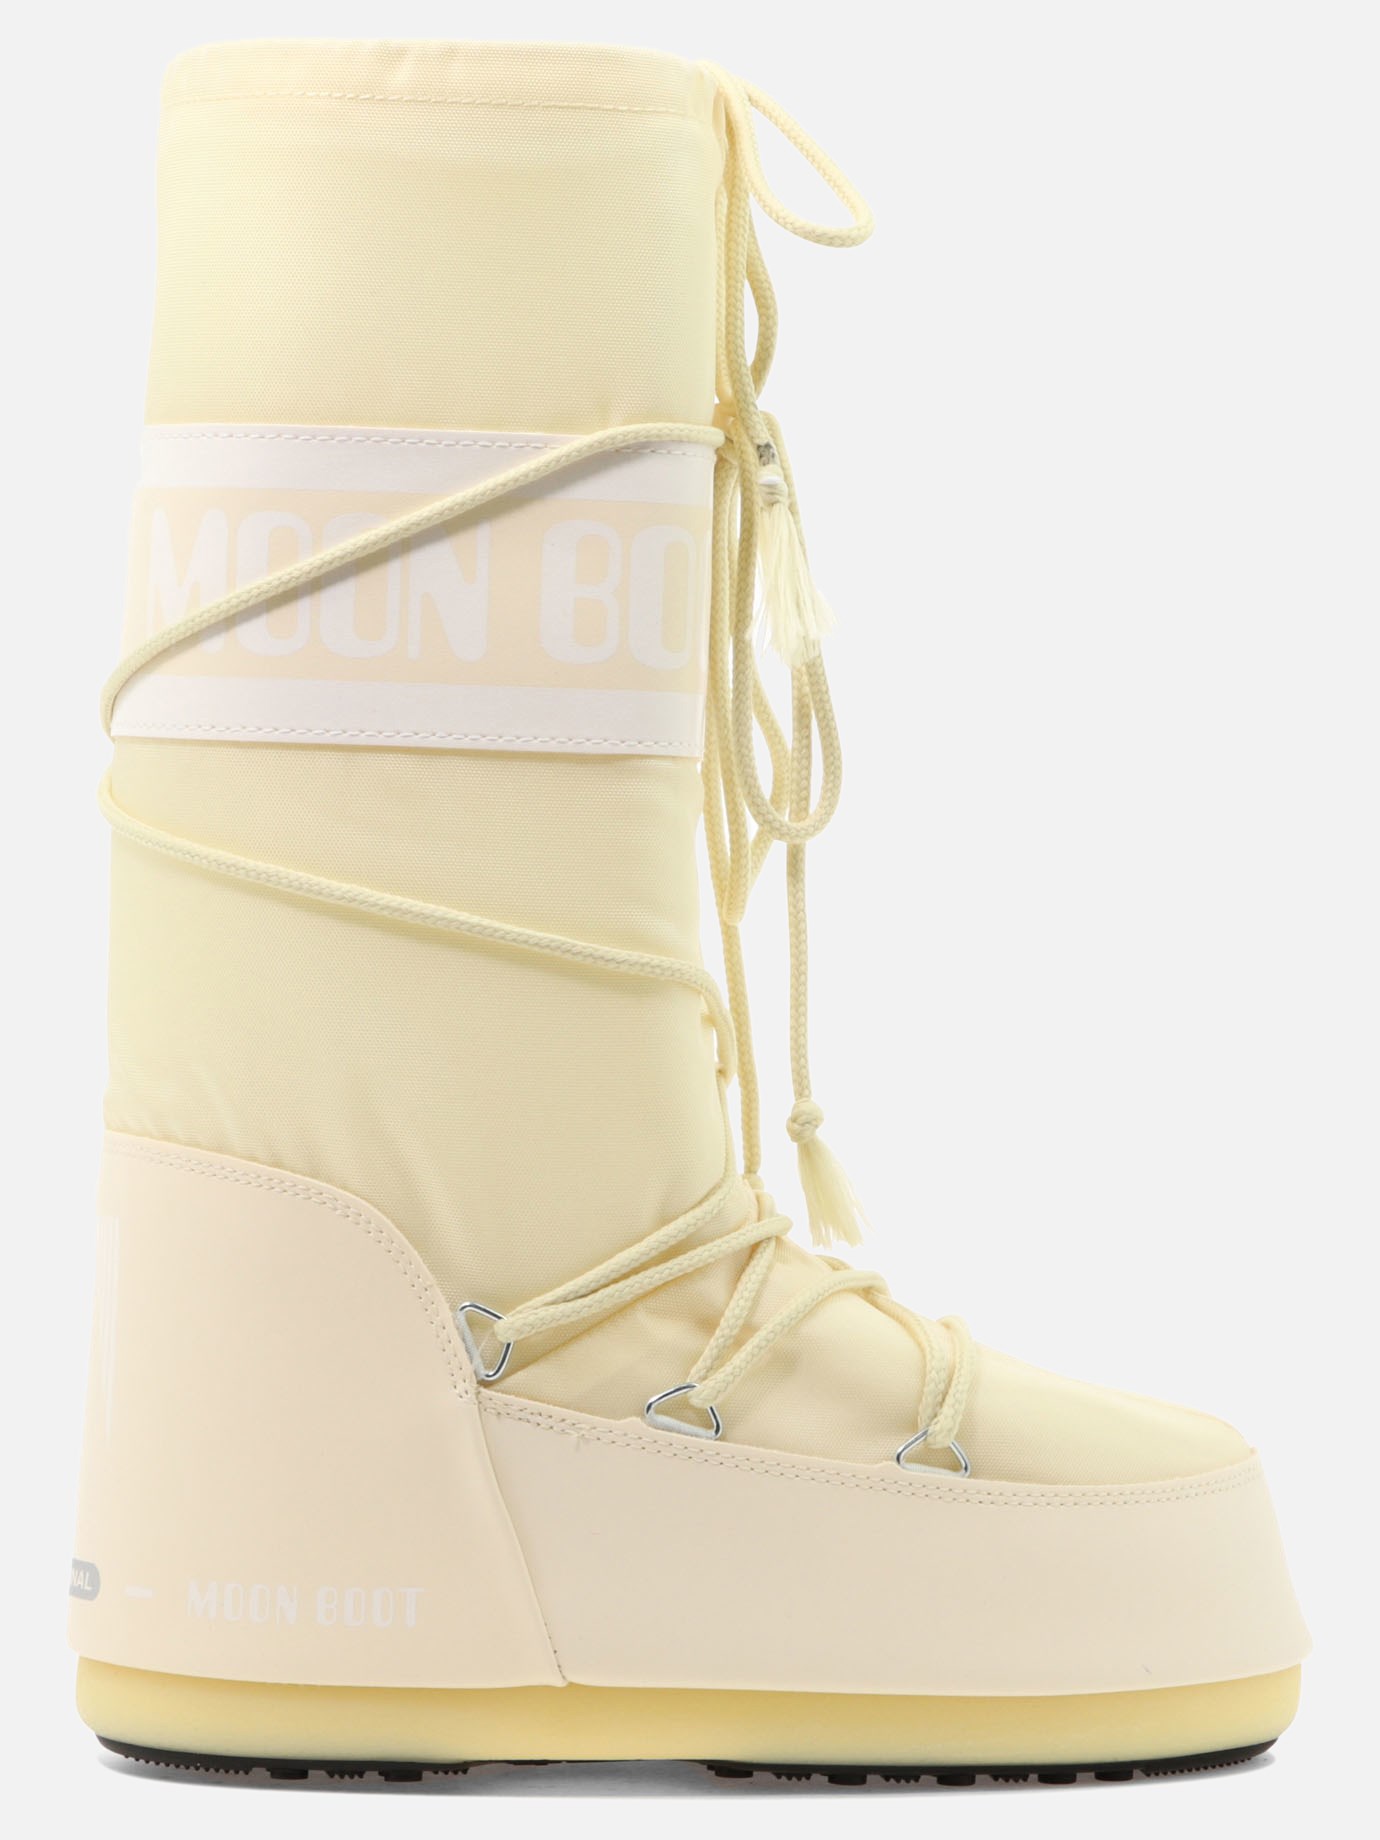  Nylon  after-ski bootsby Moon Boot - 4